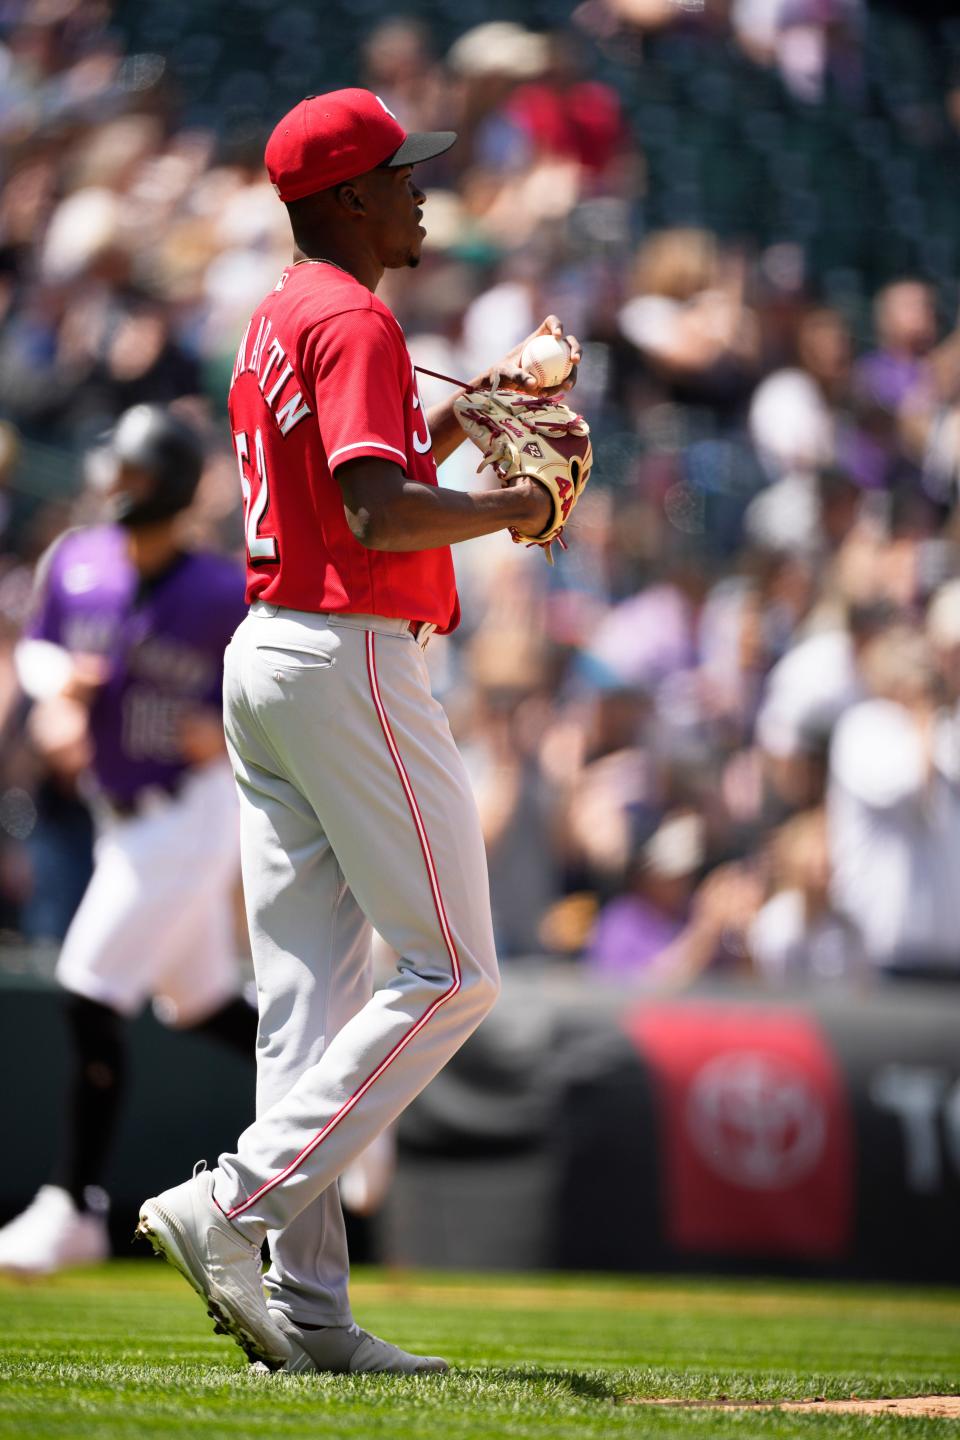 Cincinnati Reds starting pitcher Reiver Sanmartin reacts after giving up a two-run home run to Colorado Rockies' C.J. Cron in the first inning of a baseball game Sunday, May 1, 2022, in Denver.